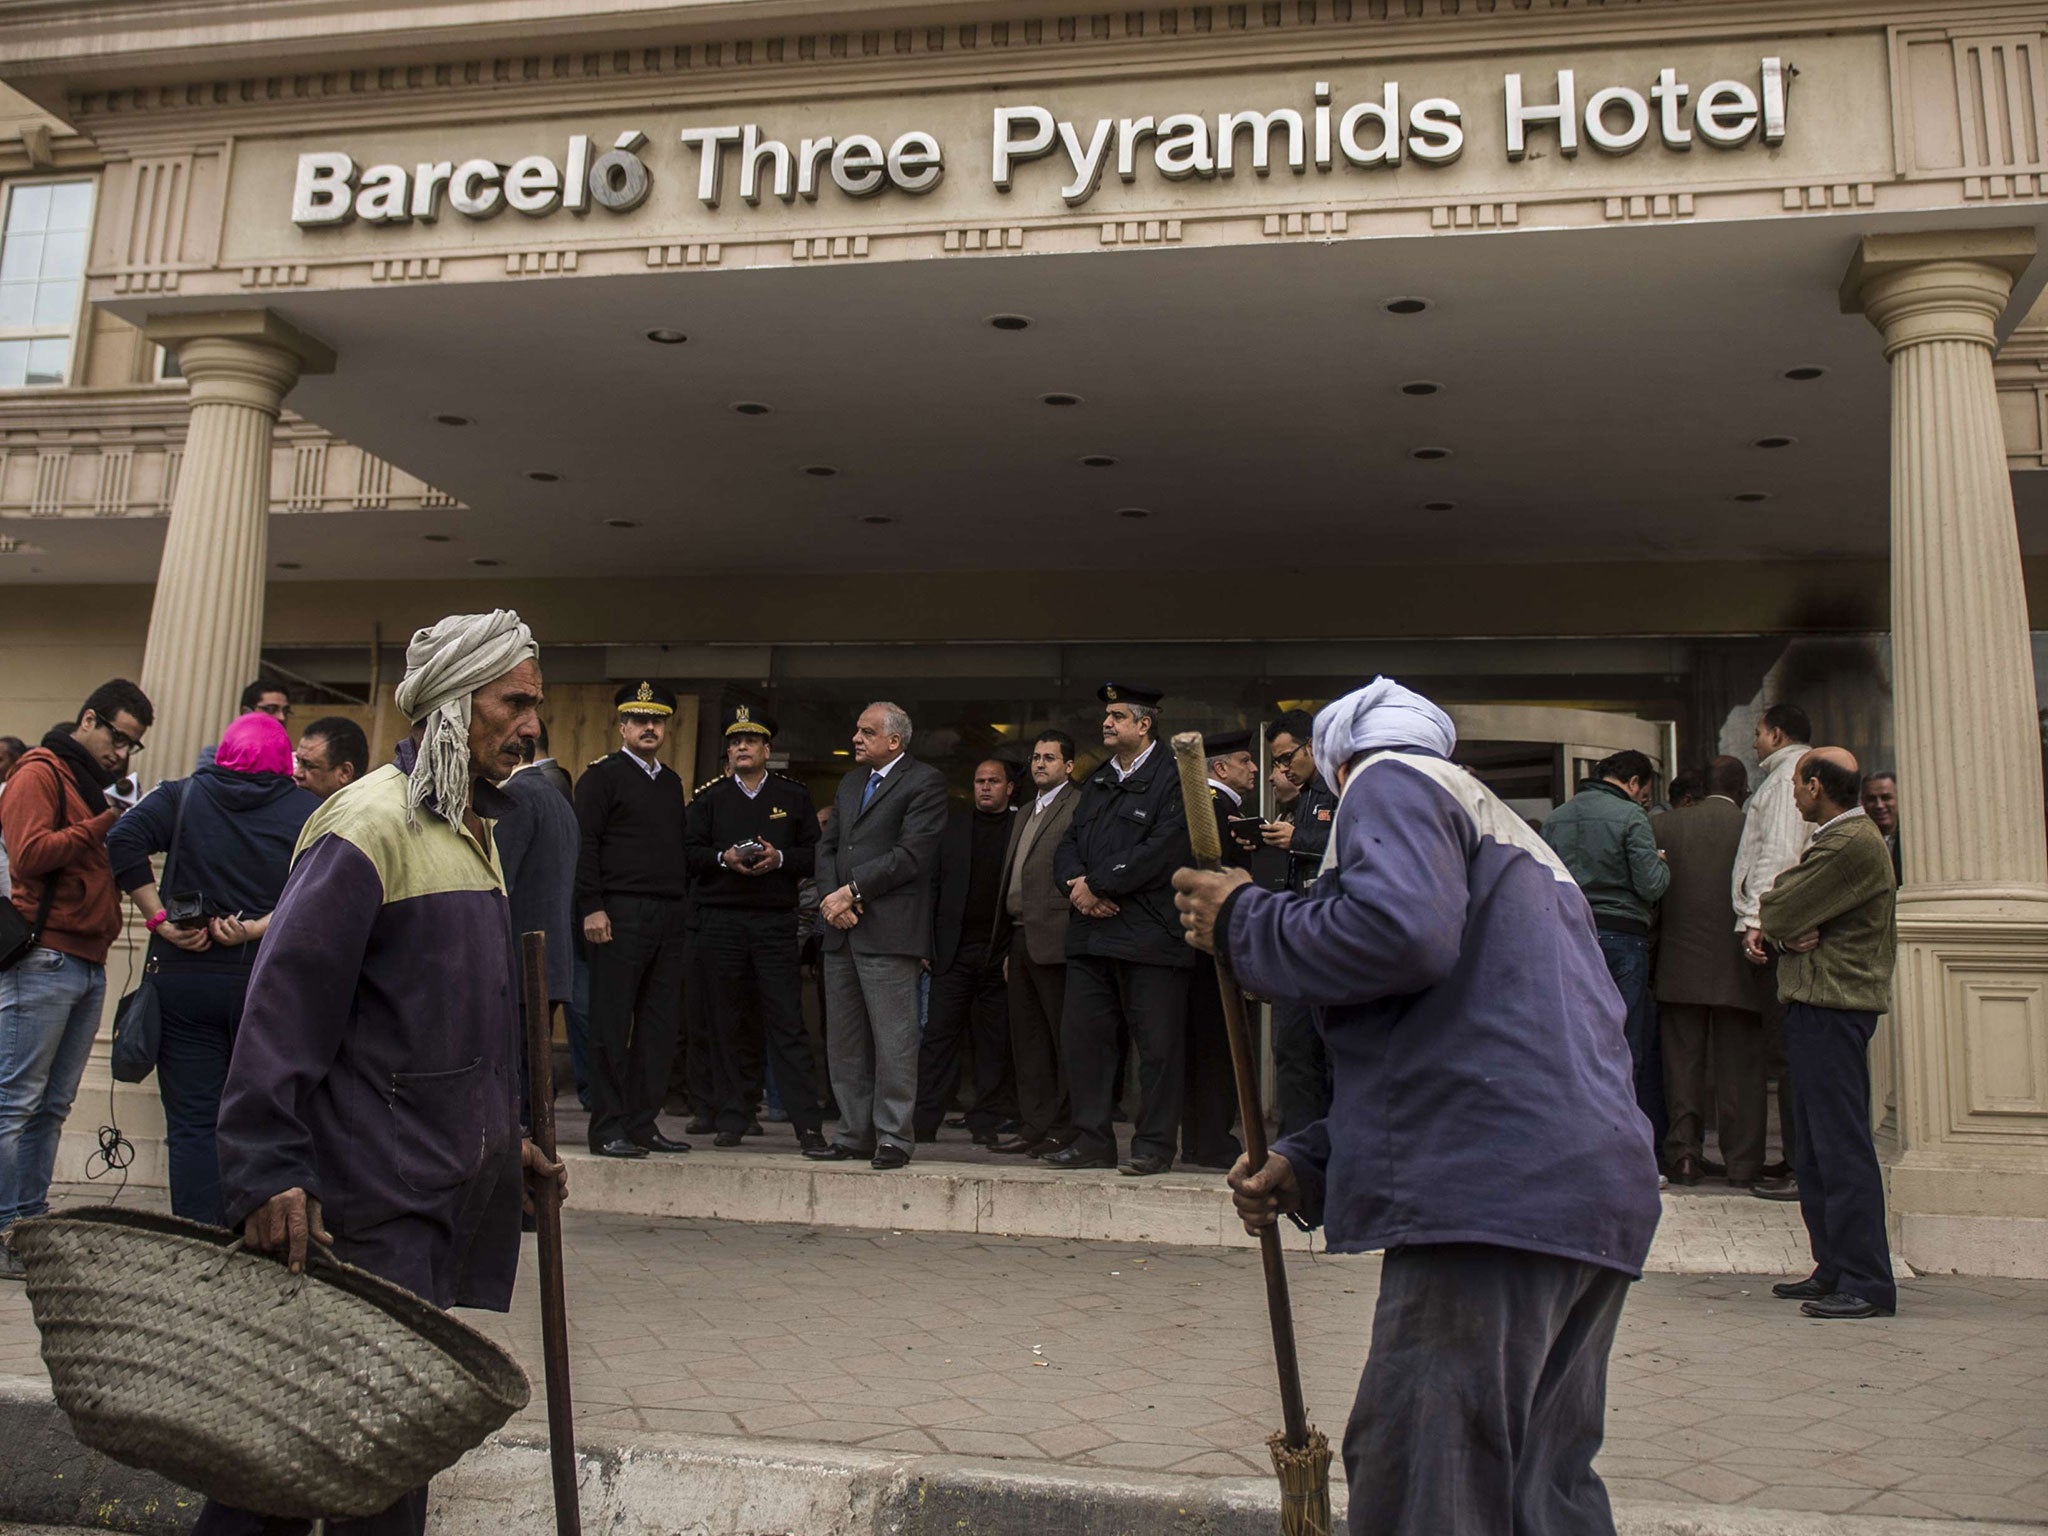 Egyptian security forces stand at the entrance of the Three Pyramids hotel in Cairo's al-Harm district on January 7, 2016